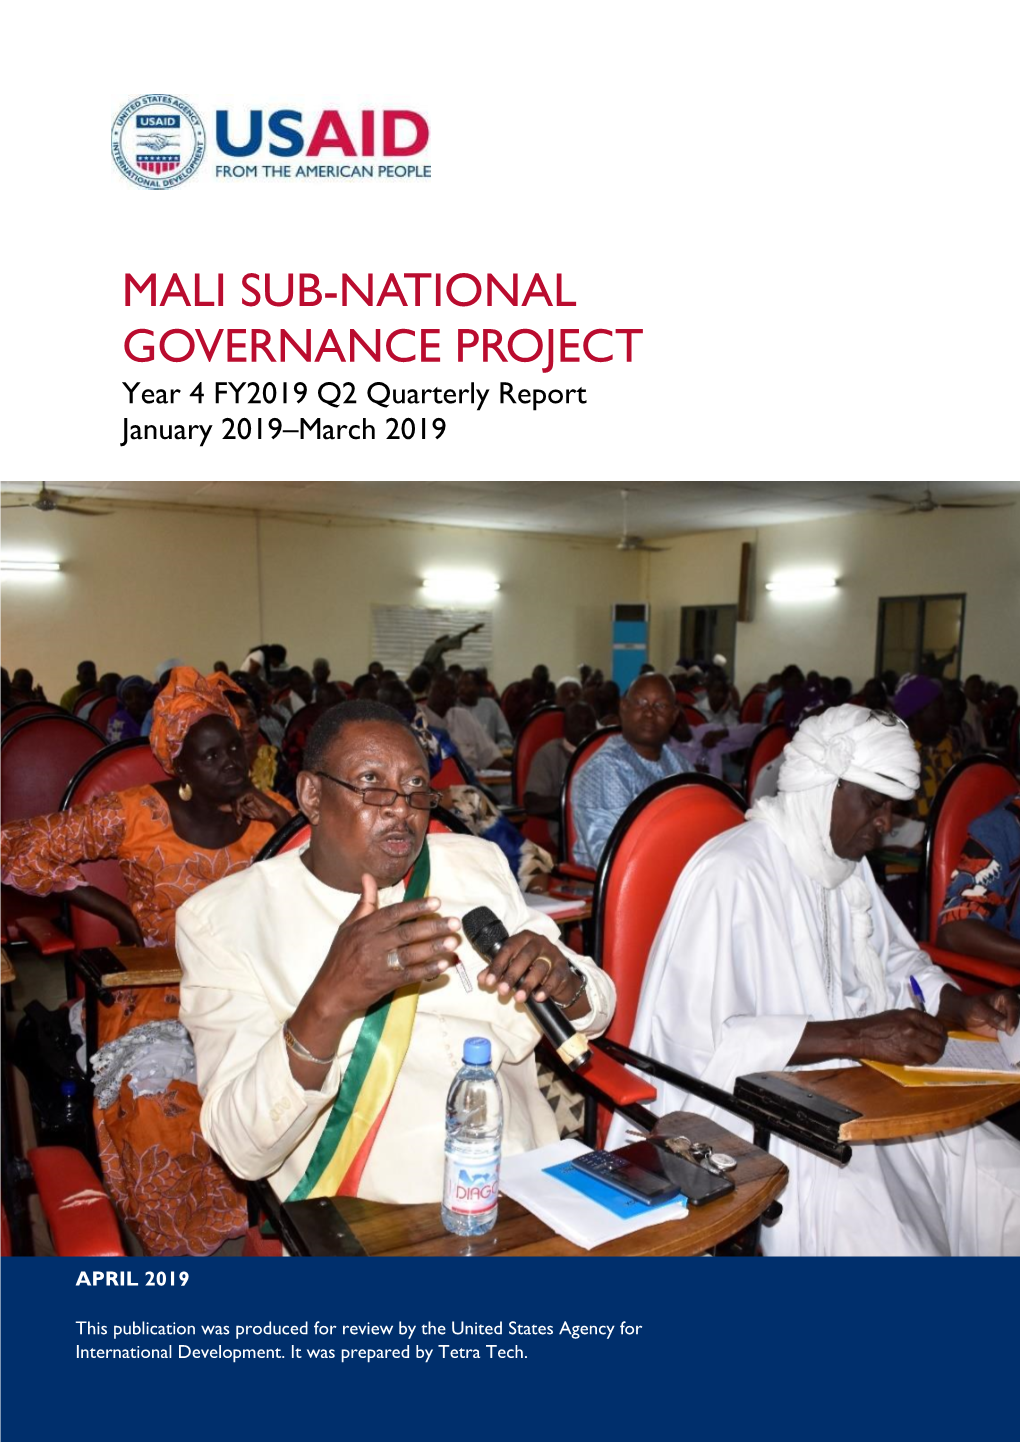 MALI SUB-NATIONAL GOVERNANCE PROJECT Year 4 FY2019 Q2 Quarterly Report January 2019–March 2019